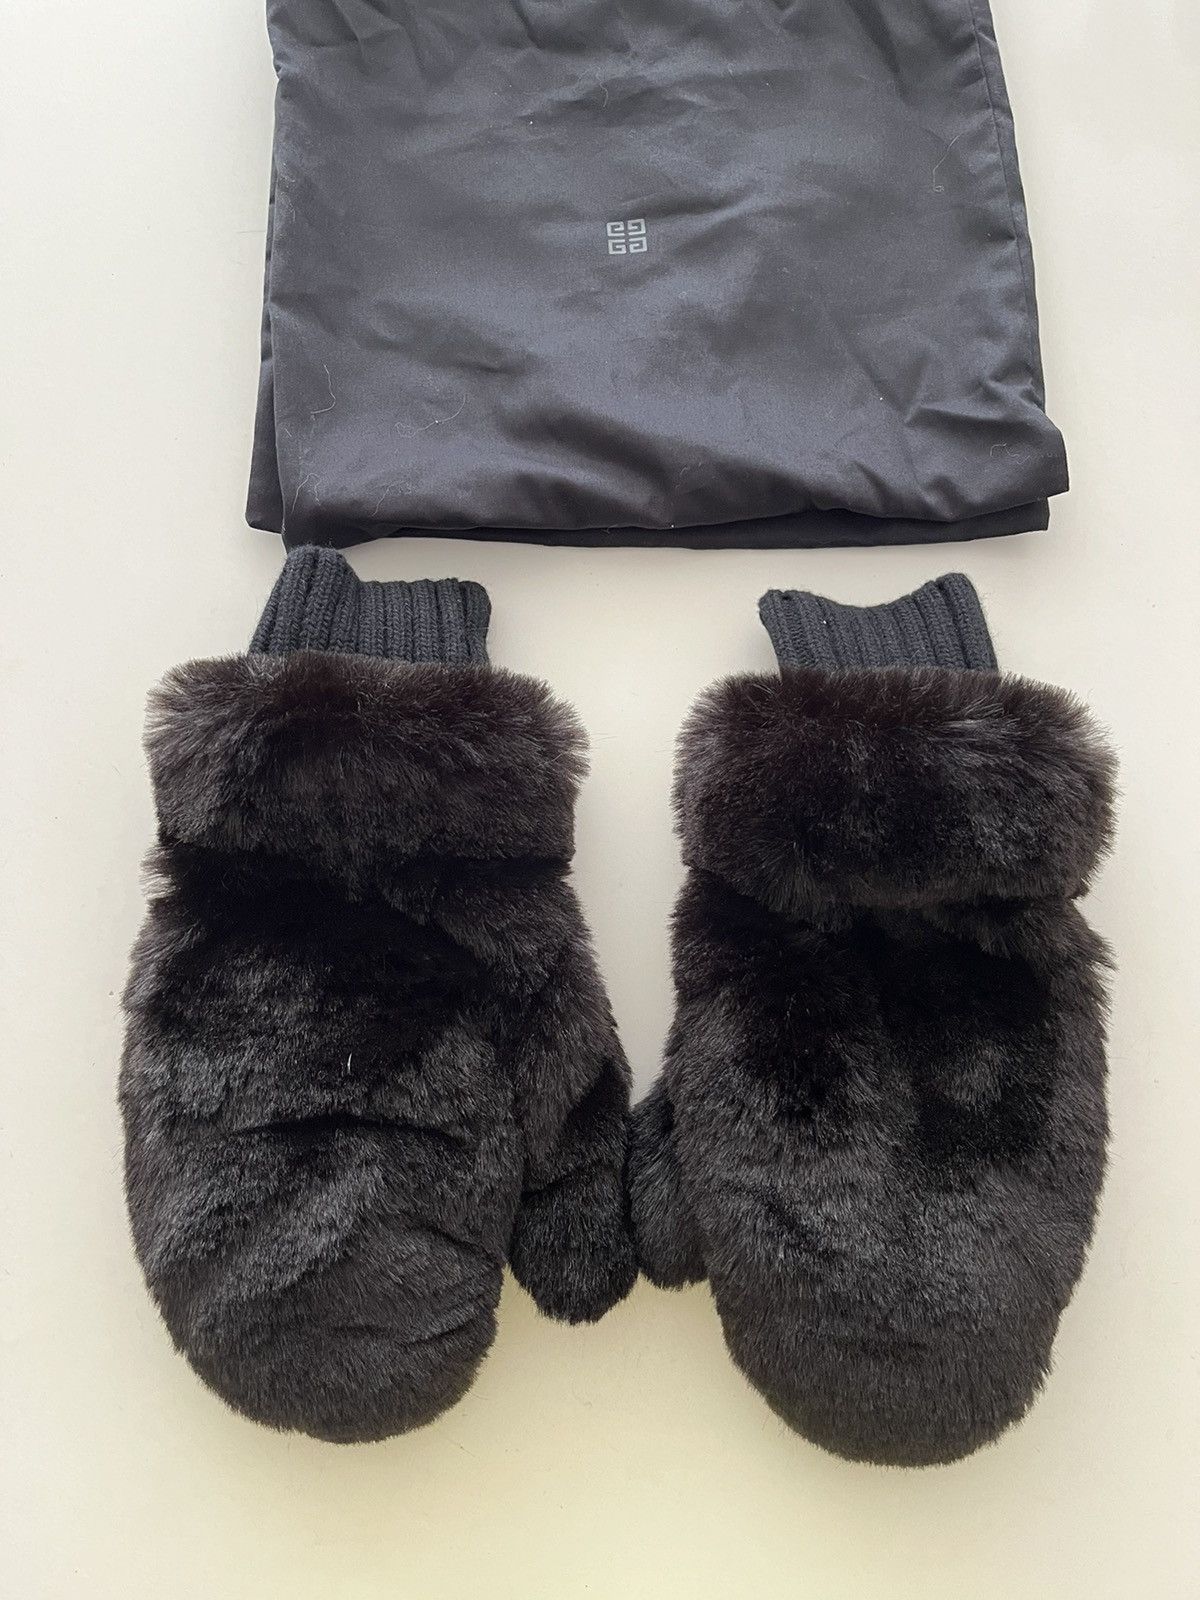 NWT - Givenchy Faux Fur Mittens - 1